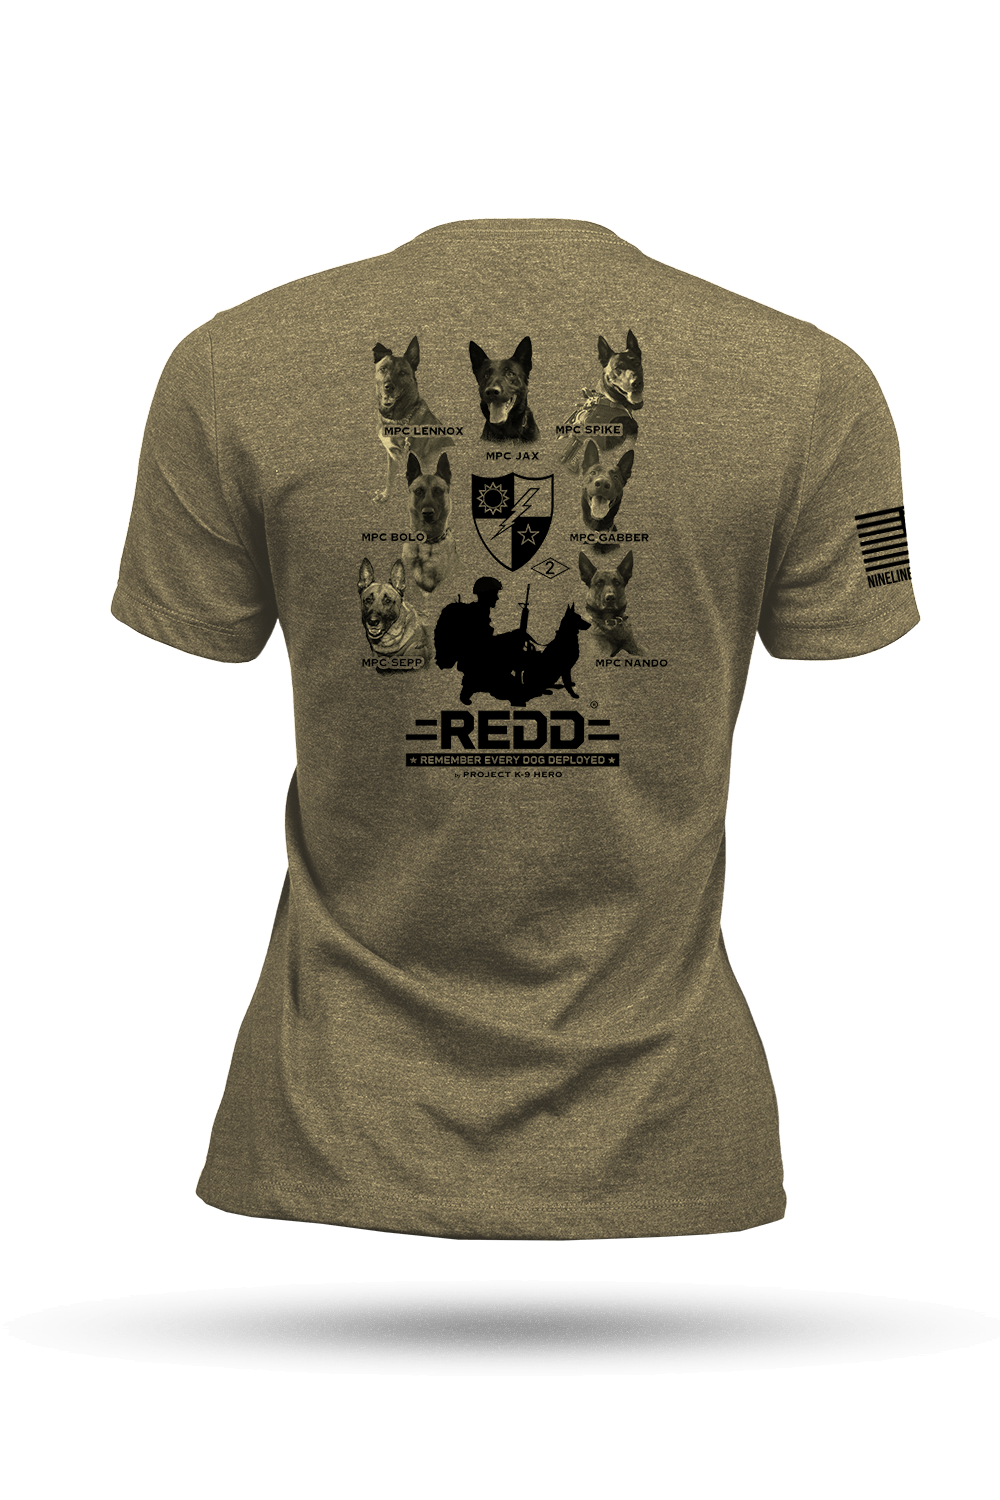 Women's T - Shirt - Project K - 9 Hero - Remember Every Dog Deployed